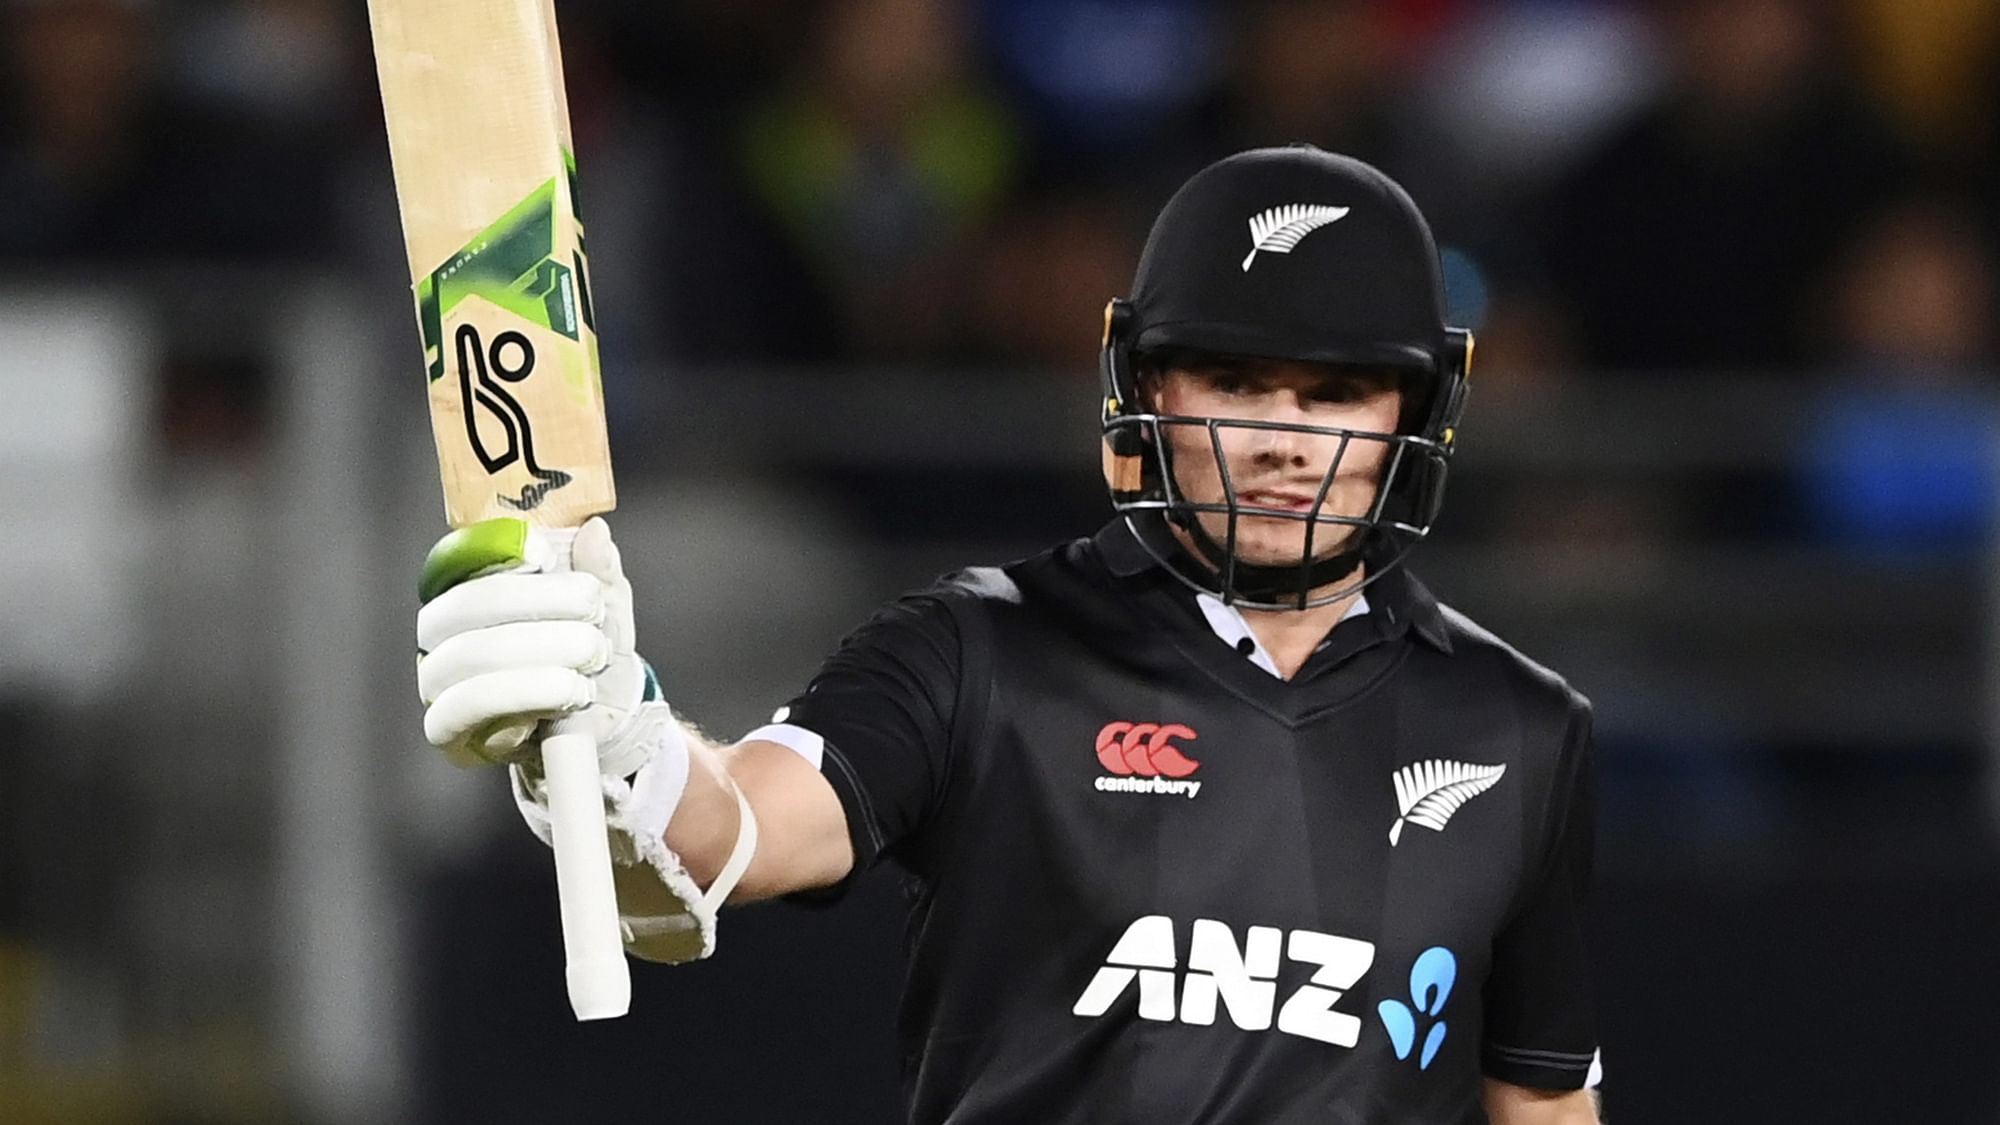 <div class="paragraphs"><p>New Zealand's Tom Latham raises his bat after making 50 runs against India during the 1st ODI.</p></div>